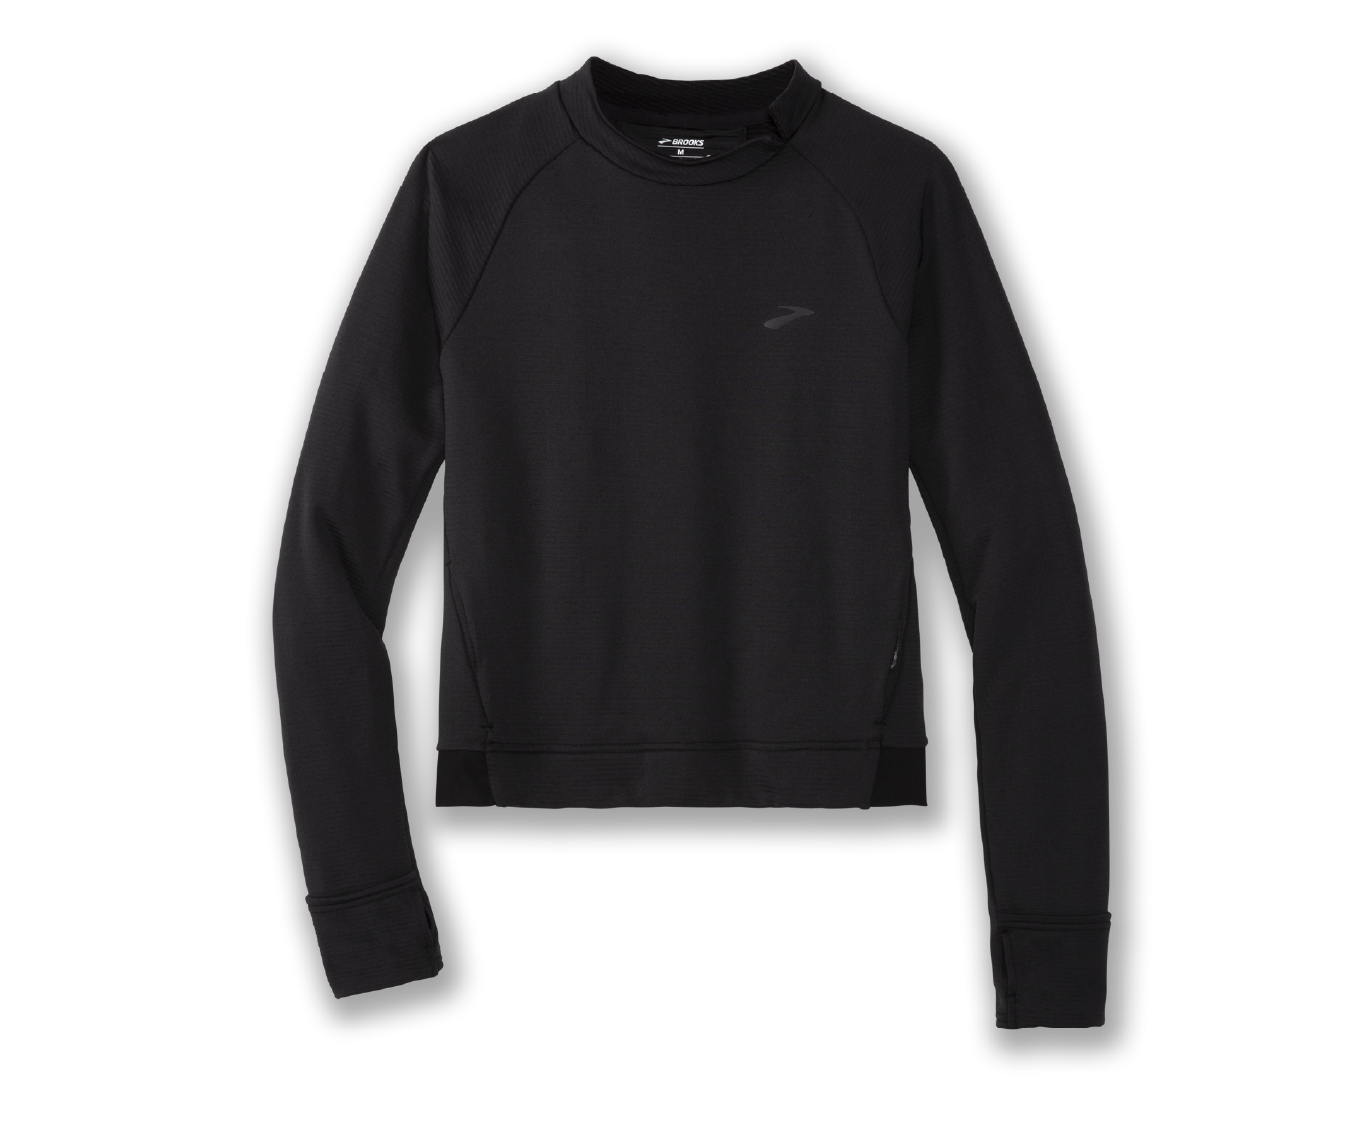 Notch Thermal Long Sleeves